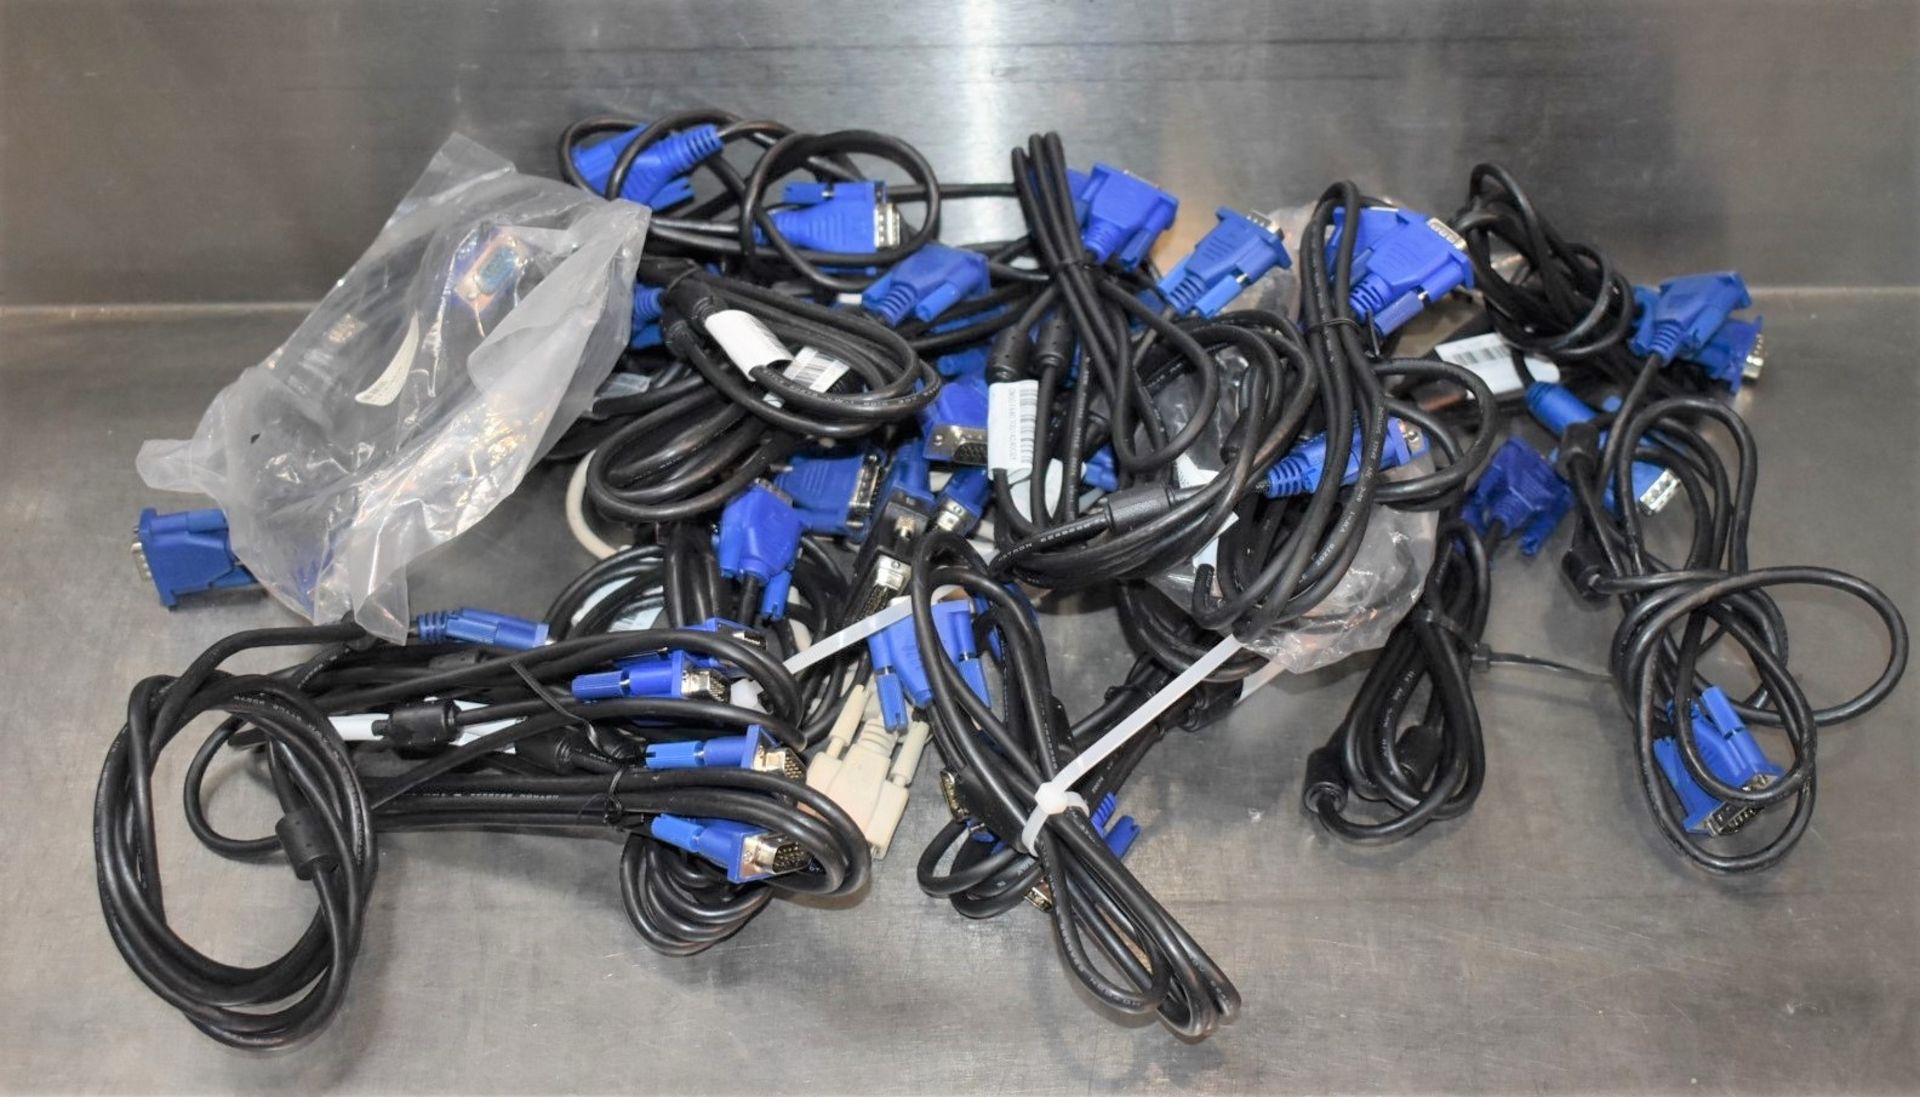 21 x VGA to VGA Monitor Cables - Ref: MPC844 - CL678 - Location: Altrincham WA14This lot is part